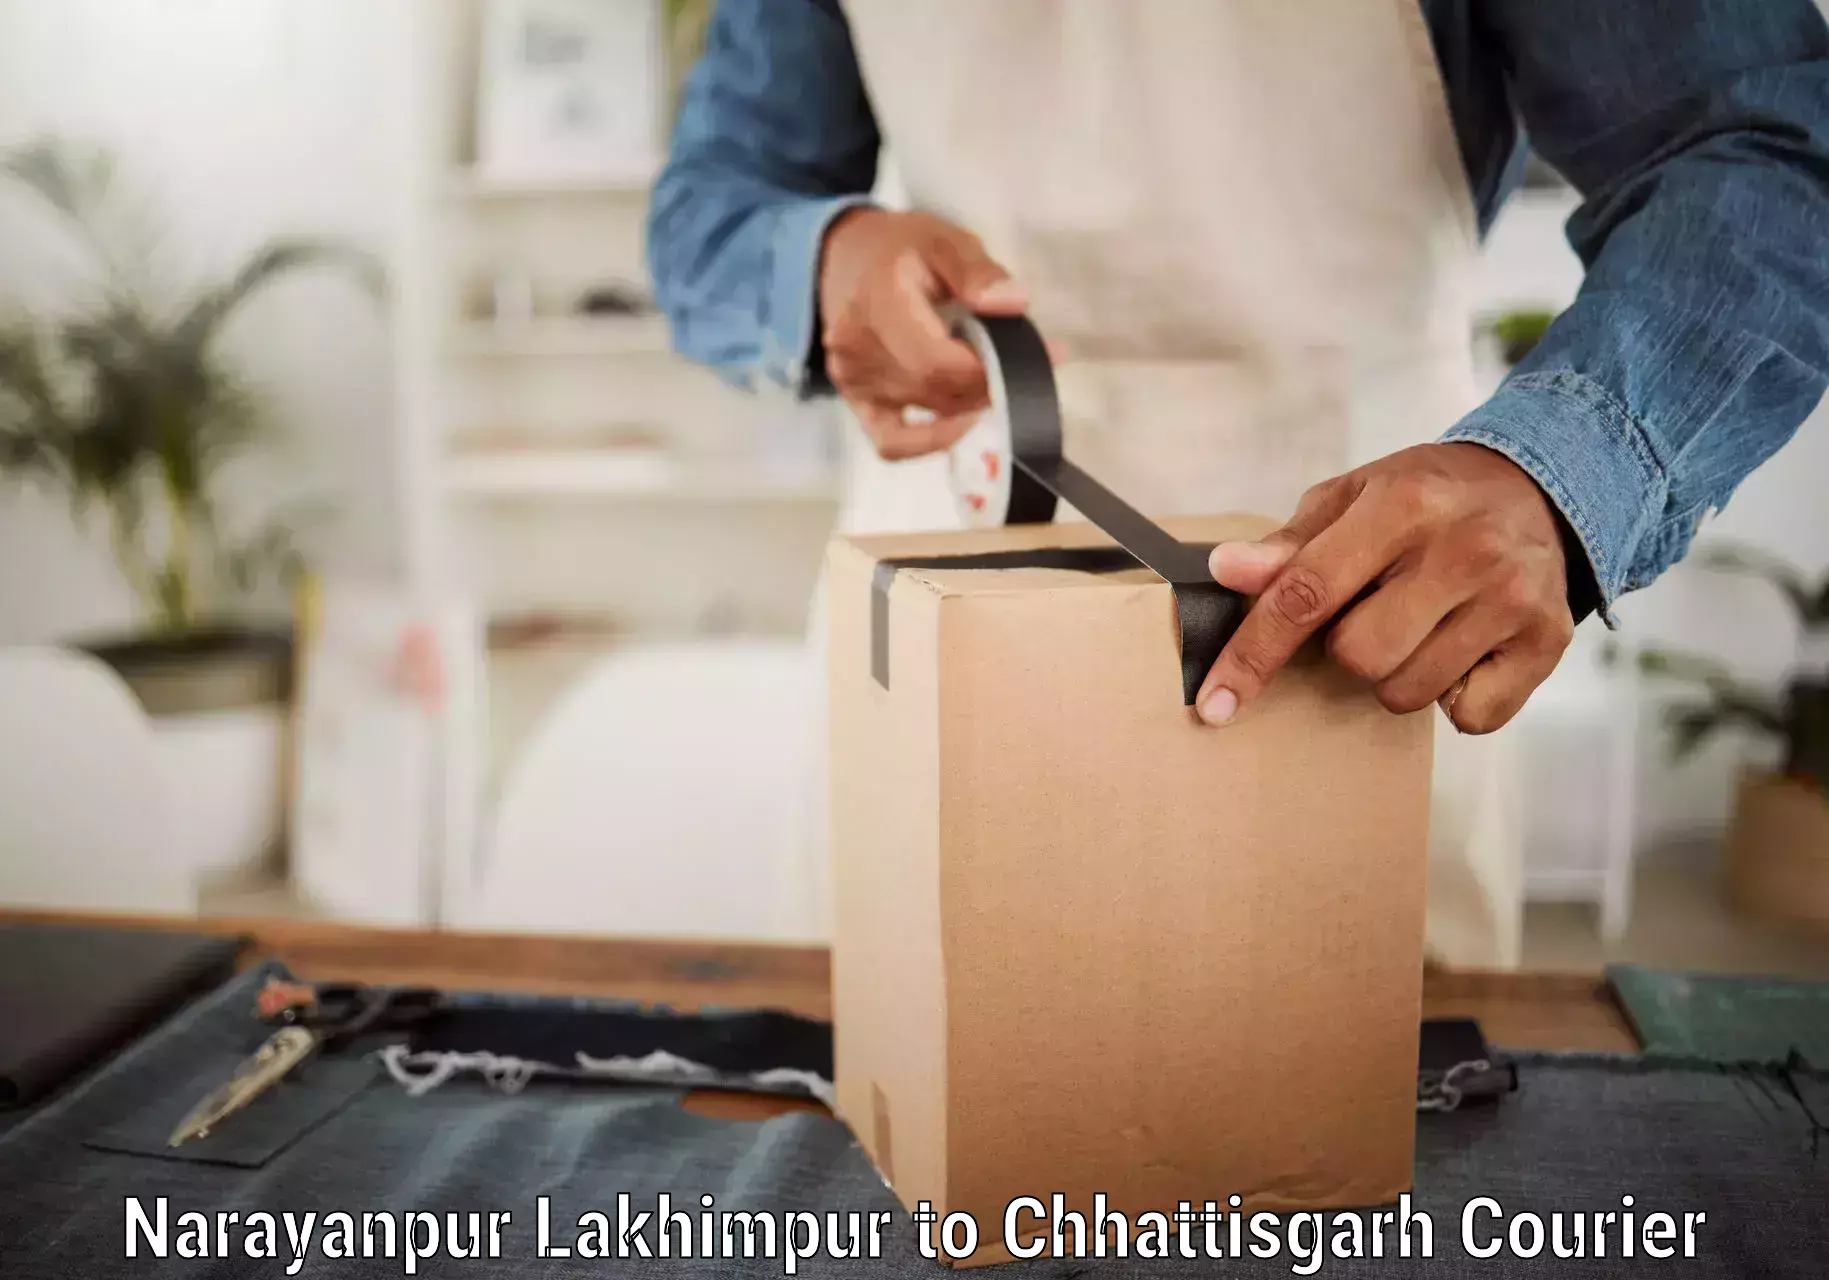 Round-the-clock parcel delivery Narayanpur Lakhimpur to Chhattisgarh